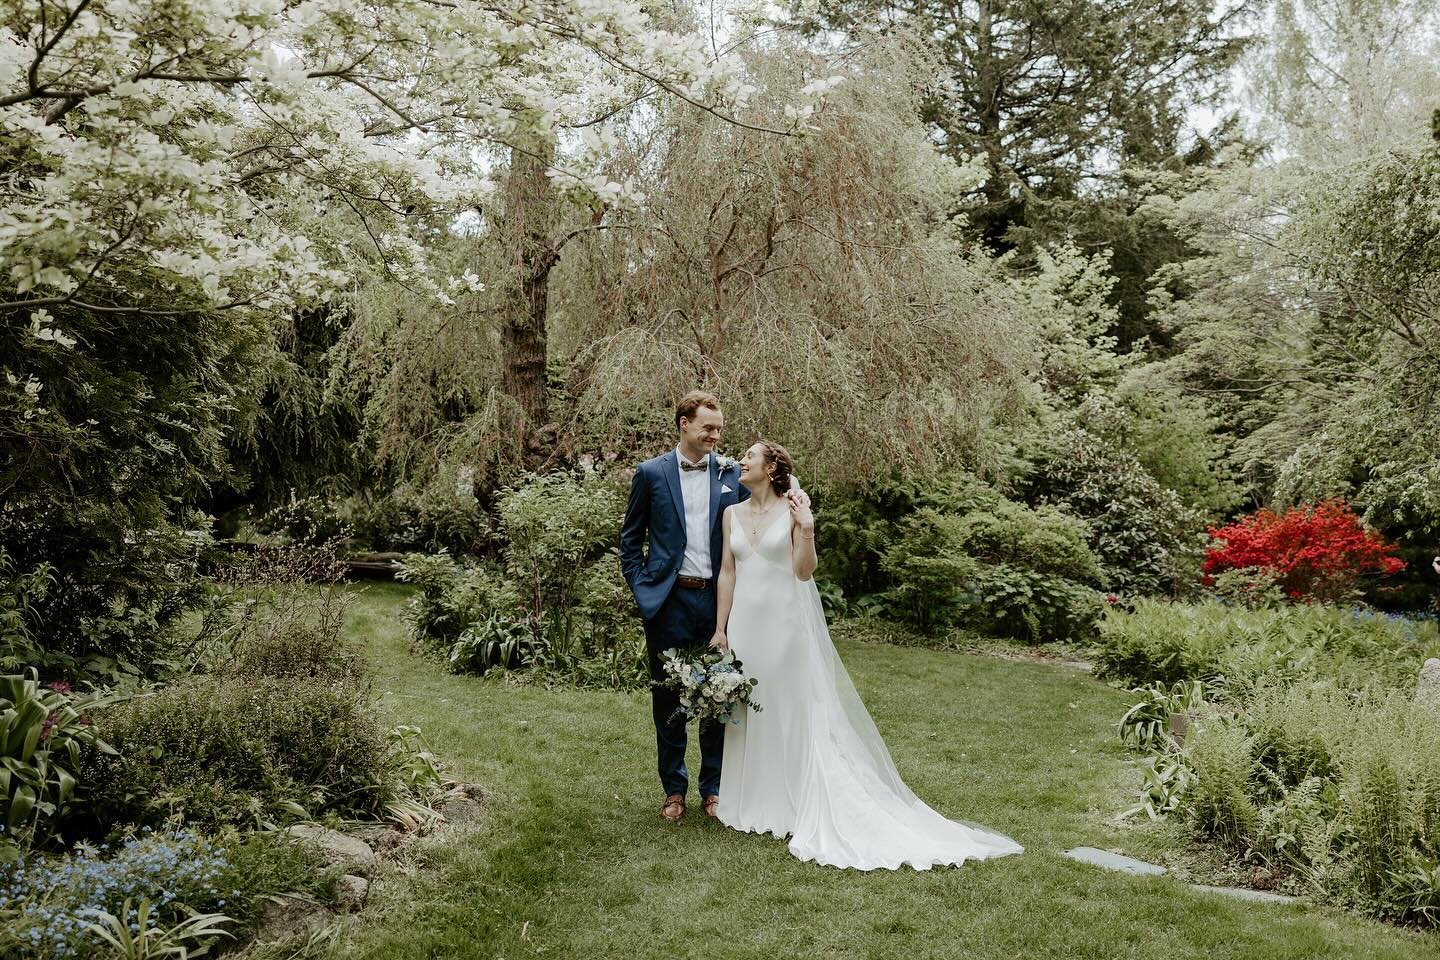 Some horizontal favorites and feelings from Caroline &amp; Matt&rsquo;s magical garden wedding at @thetrusteeslonghill on Saturday &mdash; it was such a dream day to start my wedding season and I&rsquo;m so lucky it was at the most beautiful venue wi